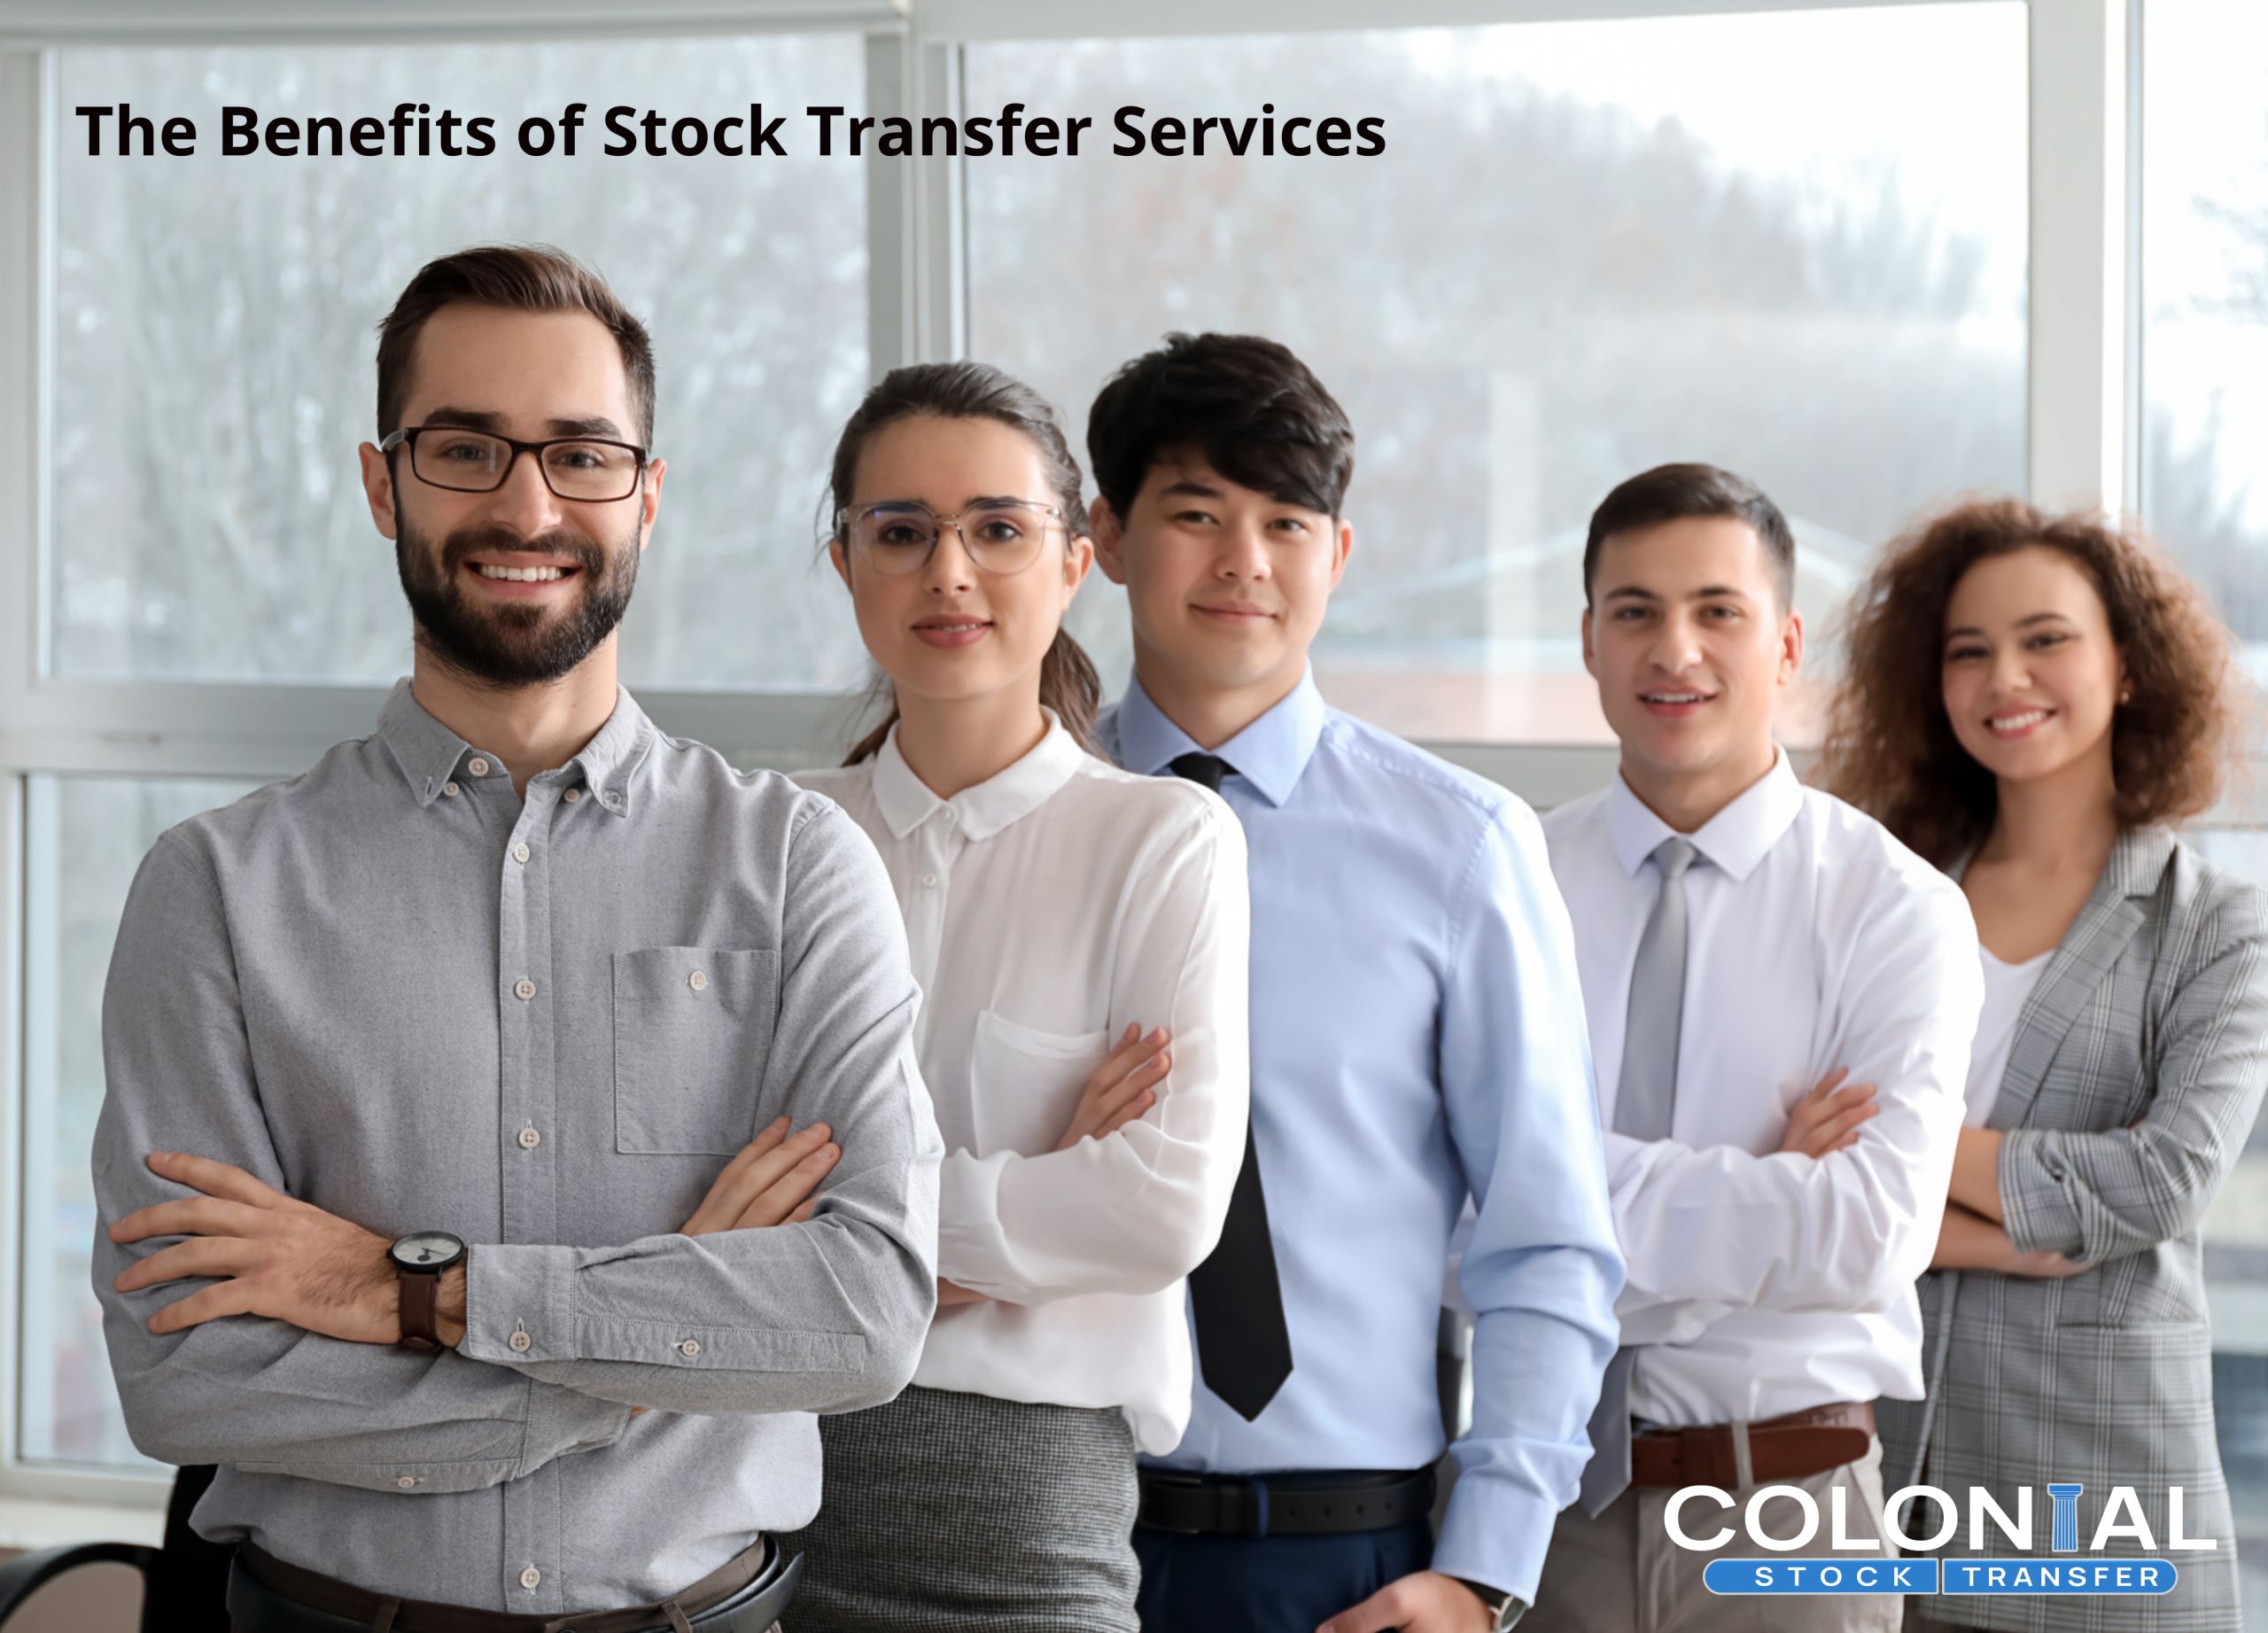 The Benefits of Stock Transfer Services